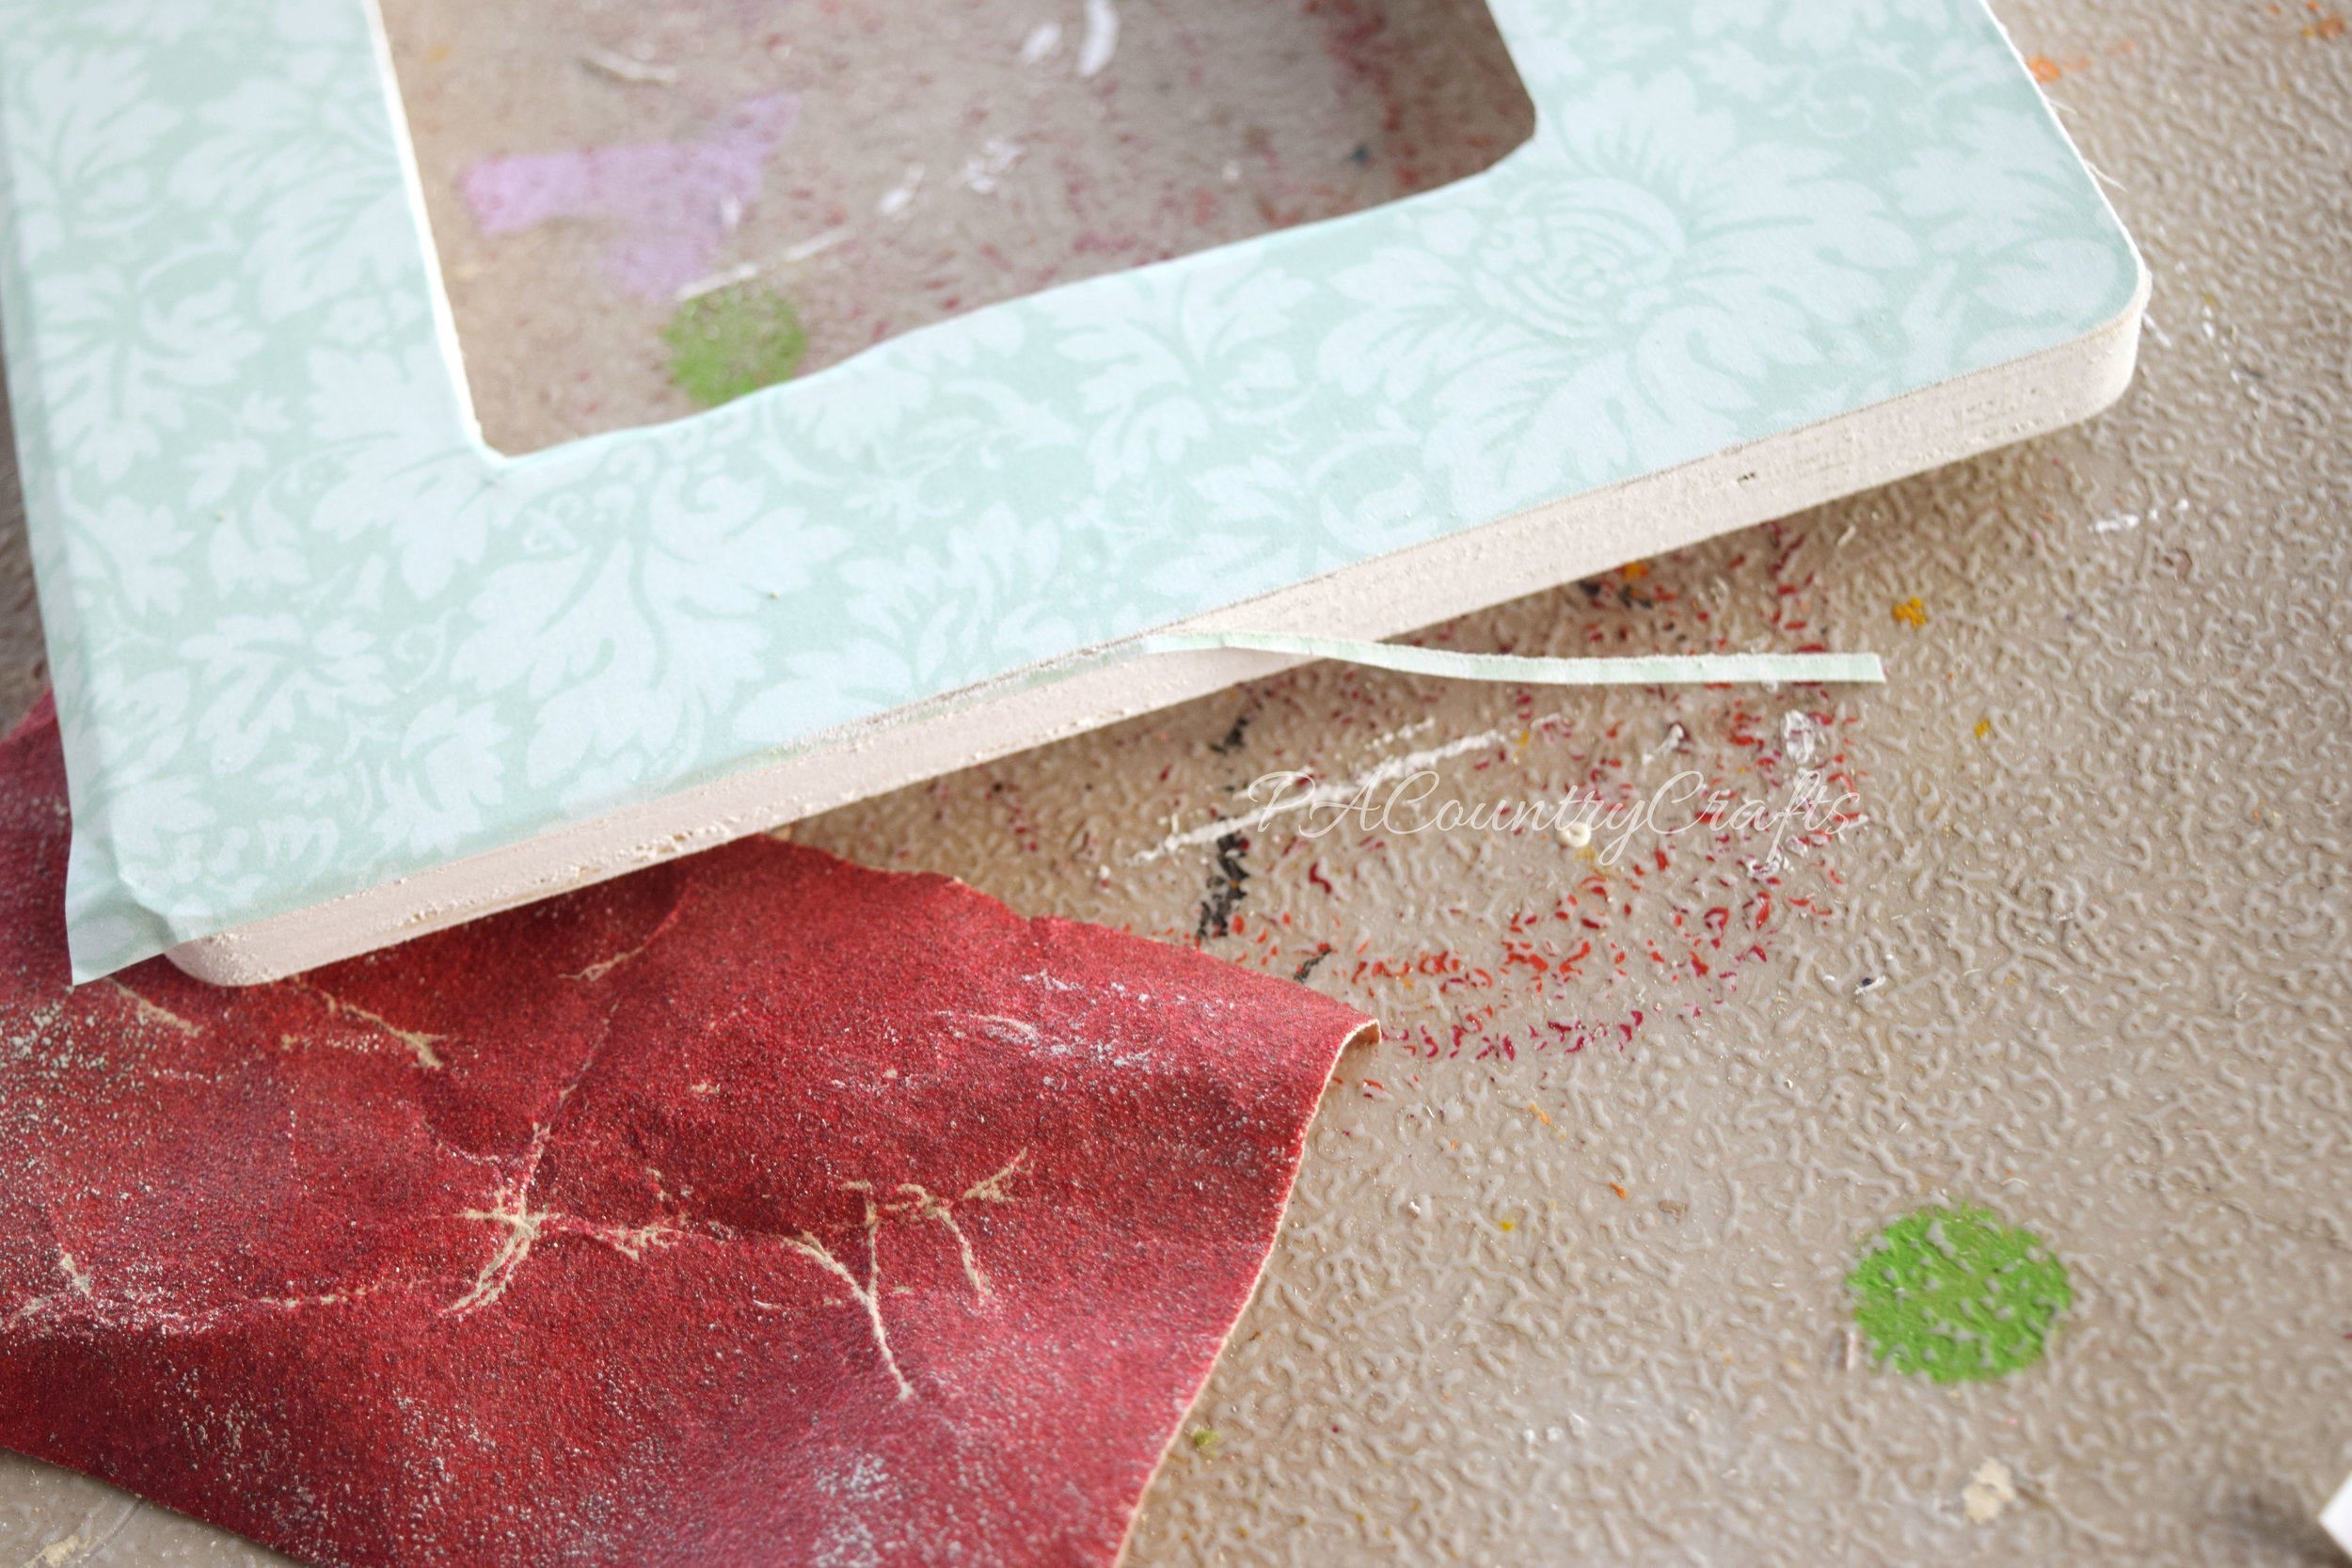 The secret to getting perfect edges on mod podge picture frames...